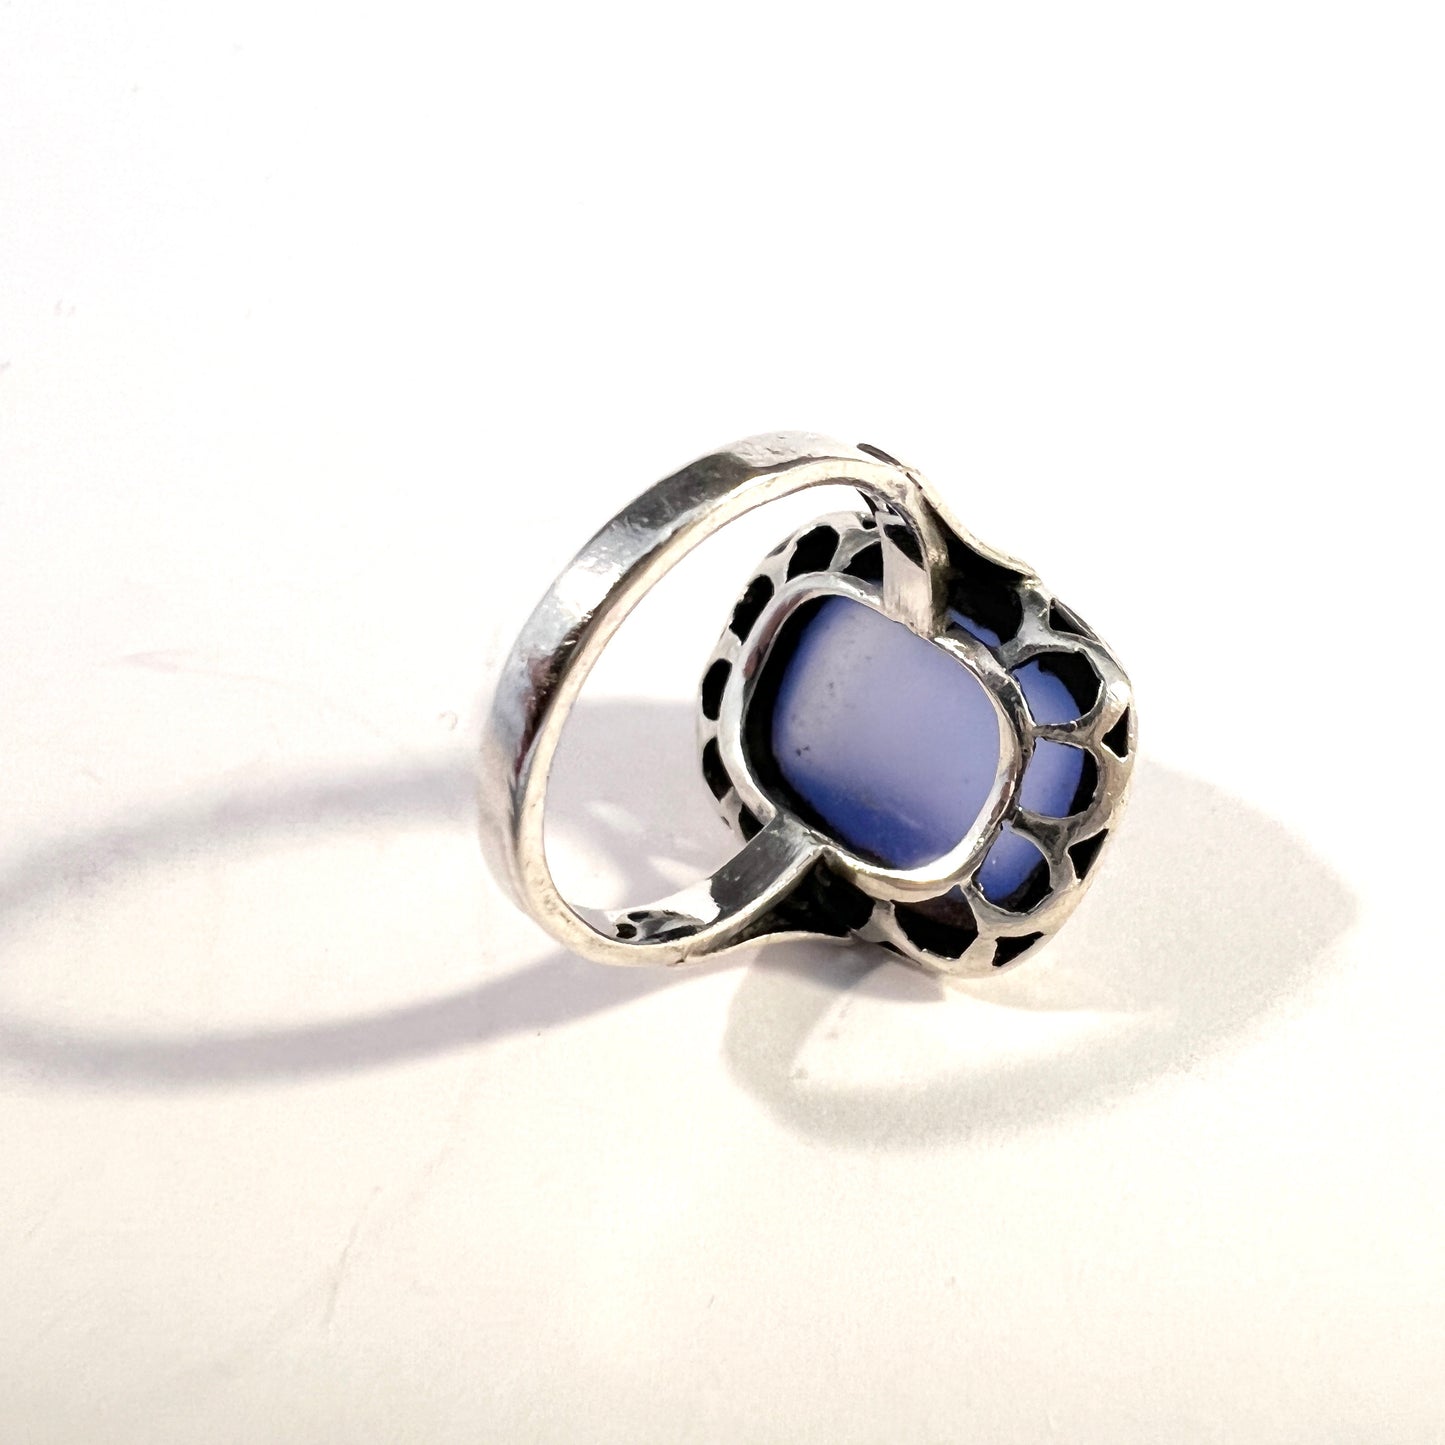 Germany / Austria 1950s. Vintage 835 Silver Chalcedony Ring.